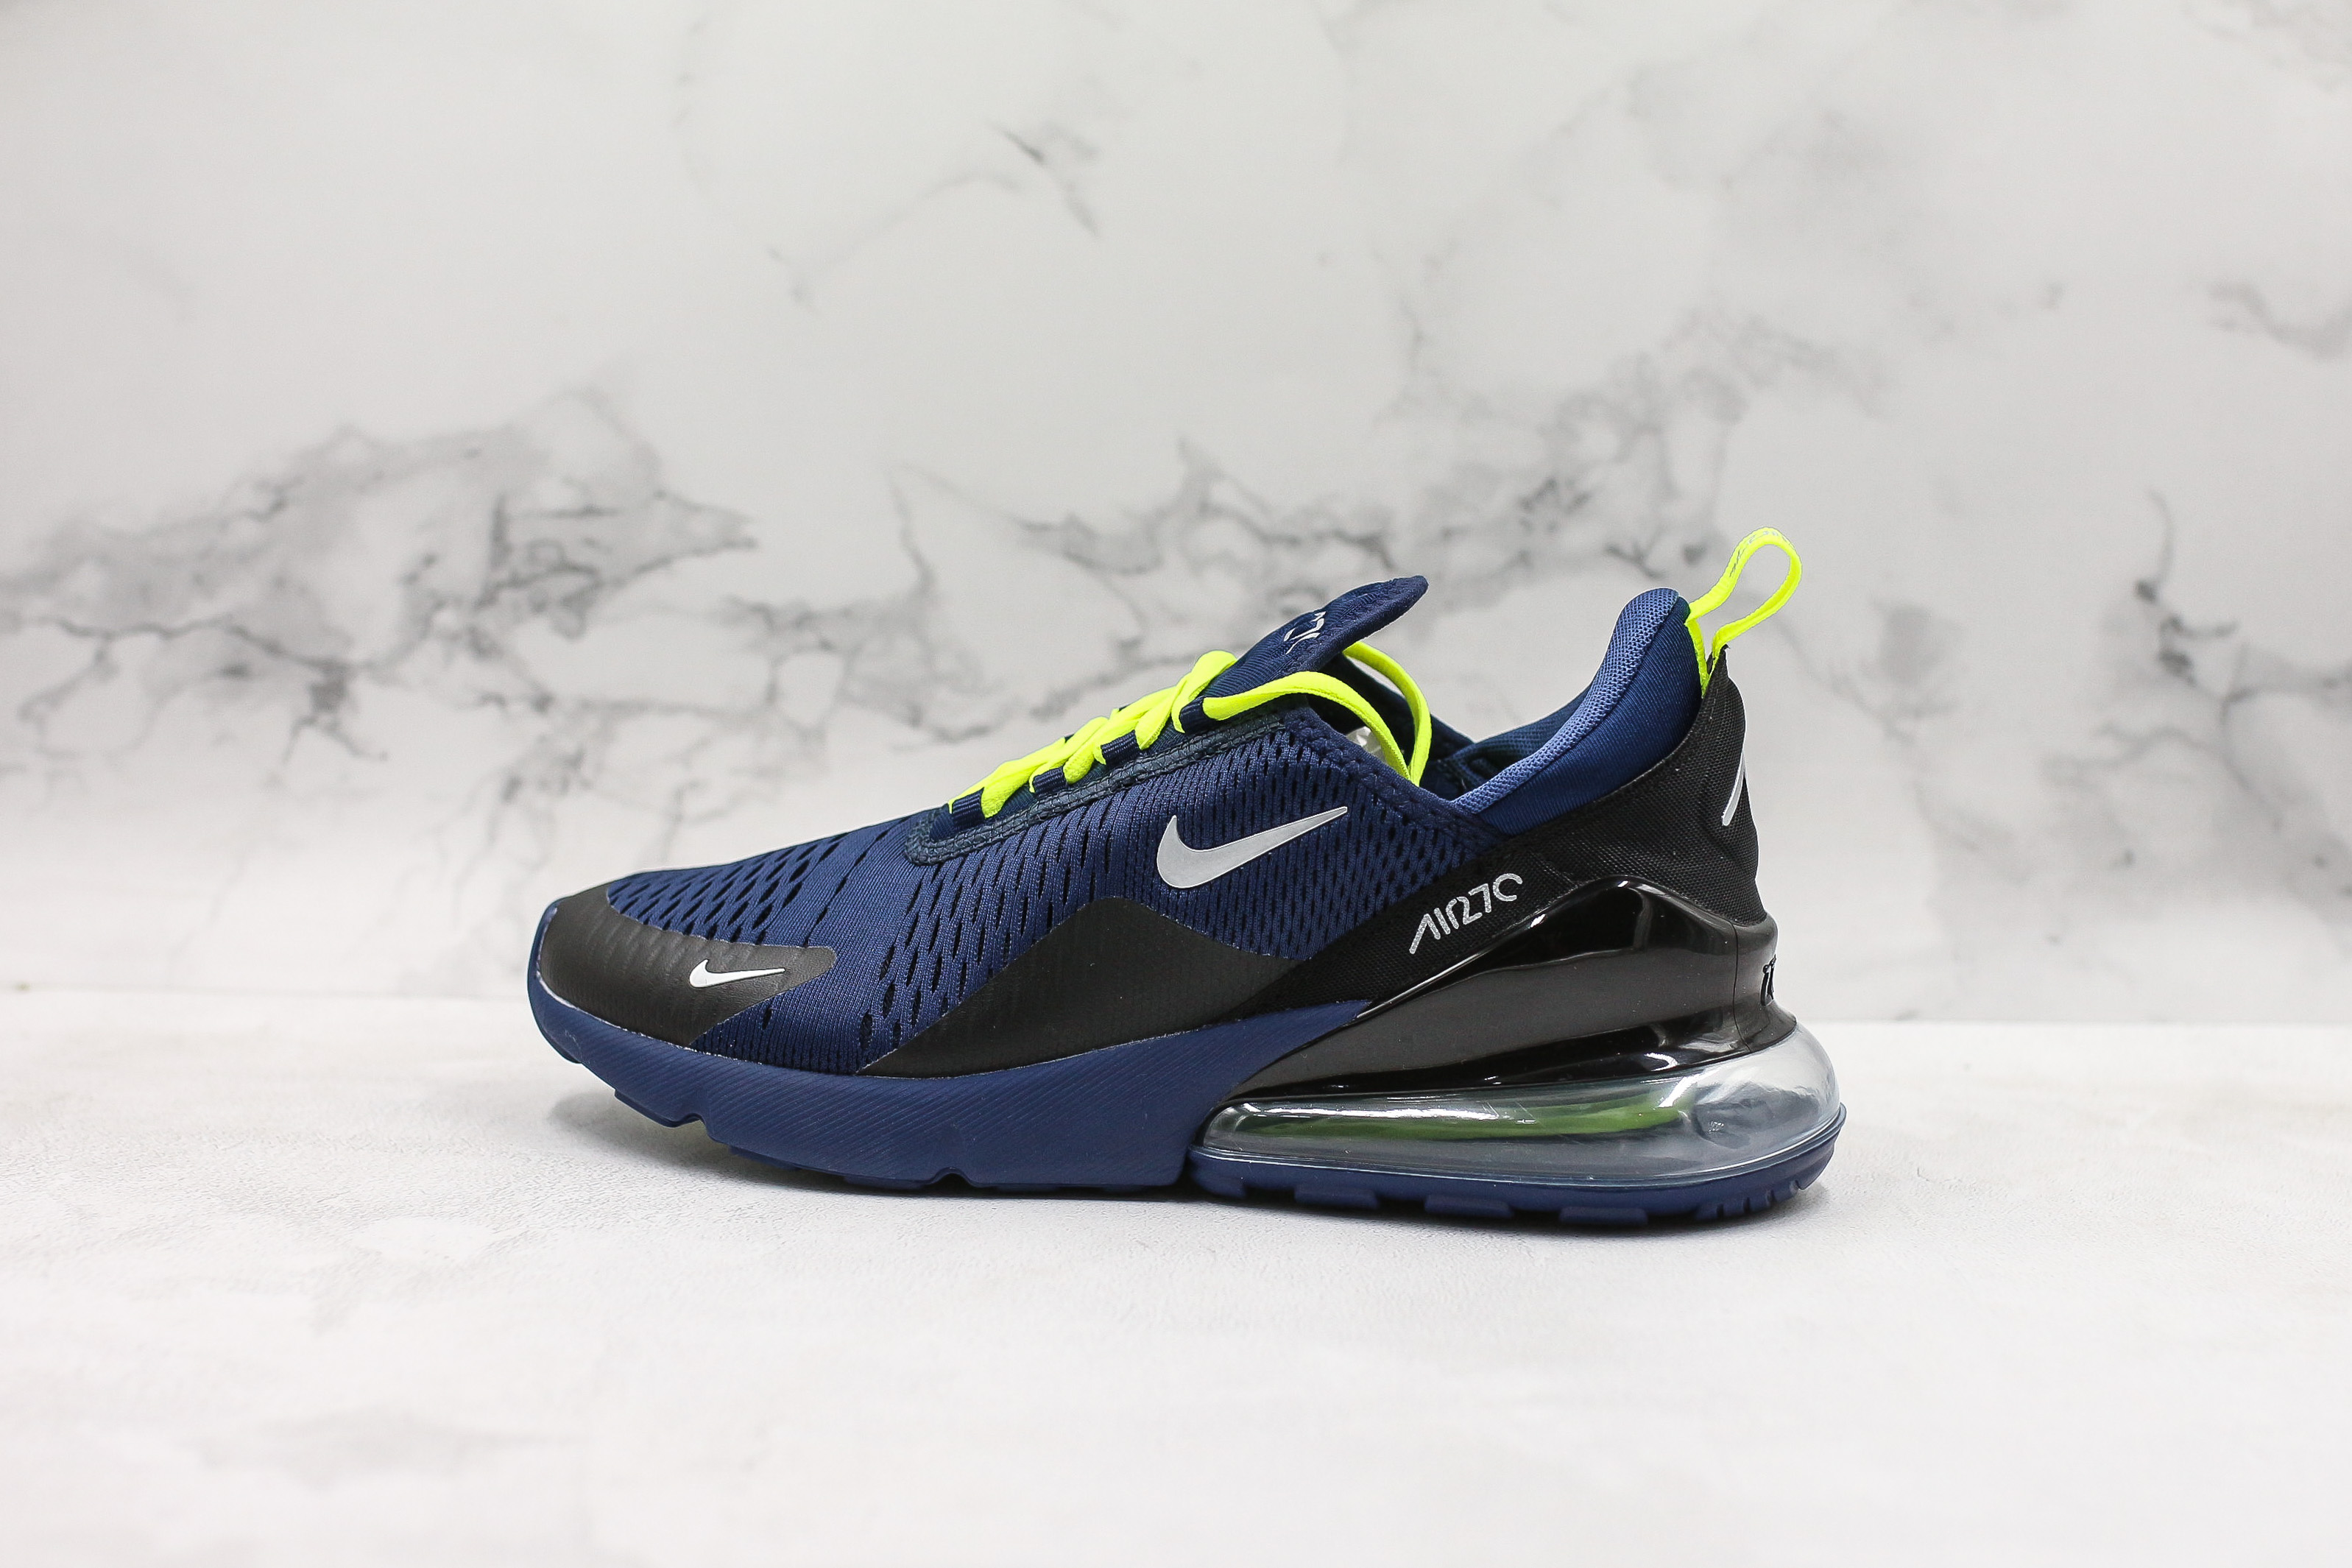 Nike Air Max 270 Blue Void/Volt-Metallic Silver For Sale – The Sole Line